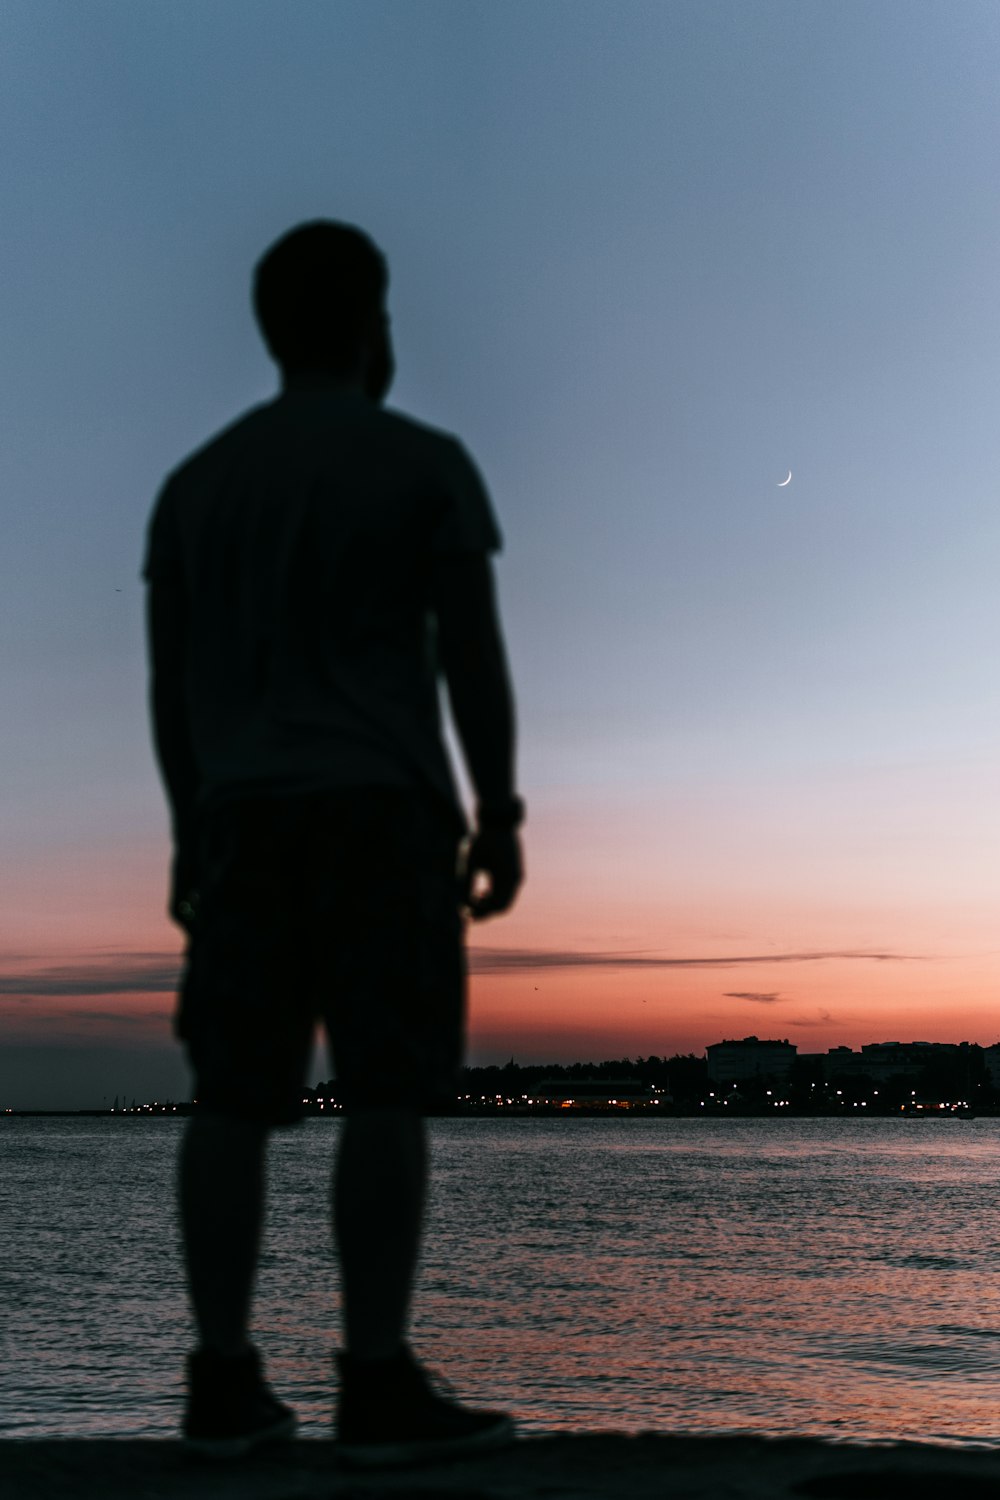 silhouette of person standing near body of water